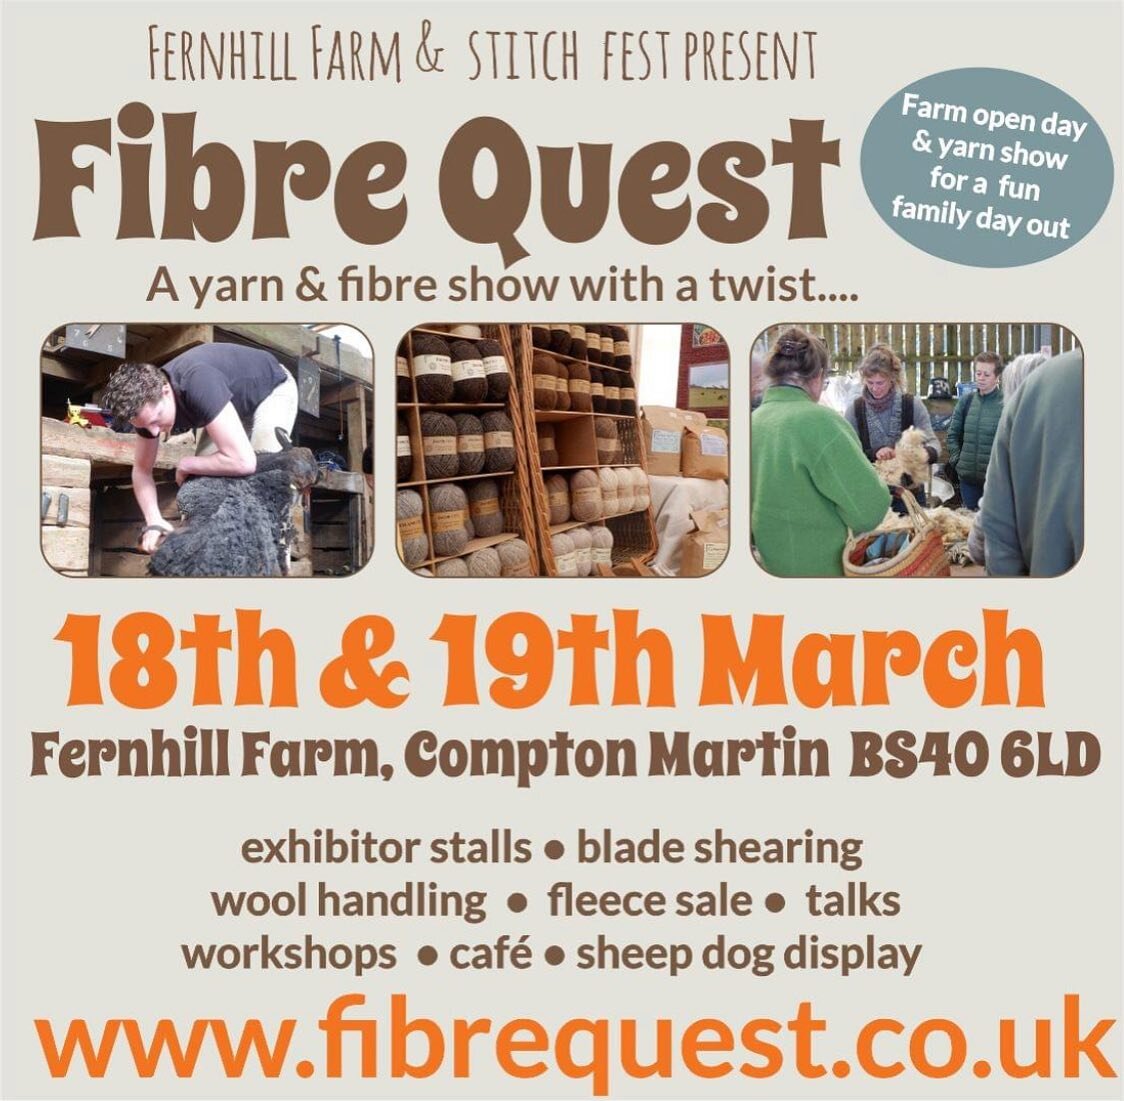 Join us this weekend for Blade Shearing, Fleece Sale and @fibrequest 

Day tickets are &pound;5 or spend the weekend with us for &pound;8 

@fernhillfibre &amp; @stitchfestsw are bringing this exciting new show to join our original Blade Shearing Tou